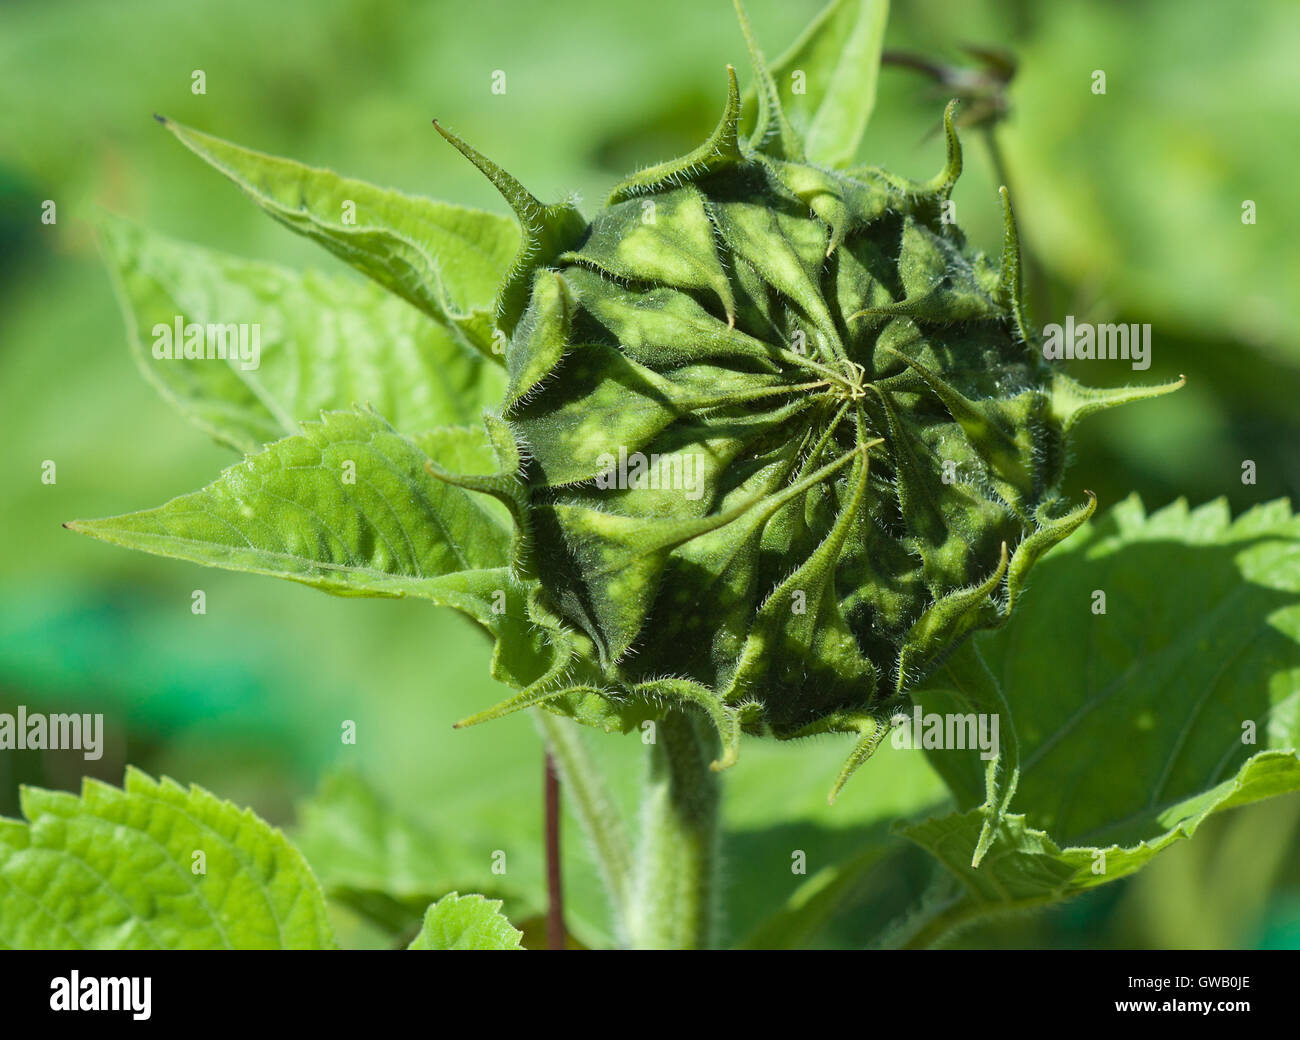 Natural environmental image. Green closed sunflower bud with green background of other plats. Stock Photo